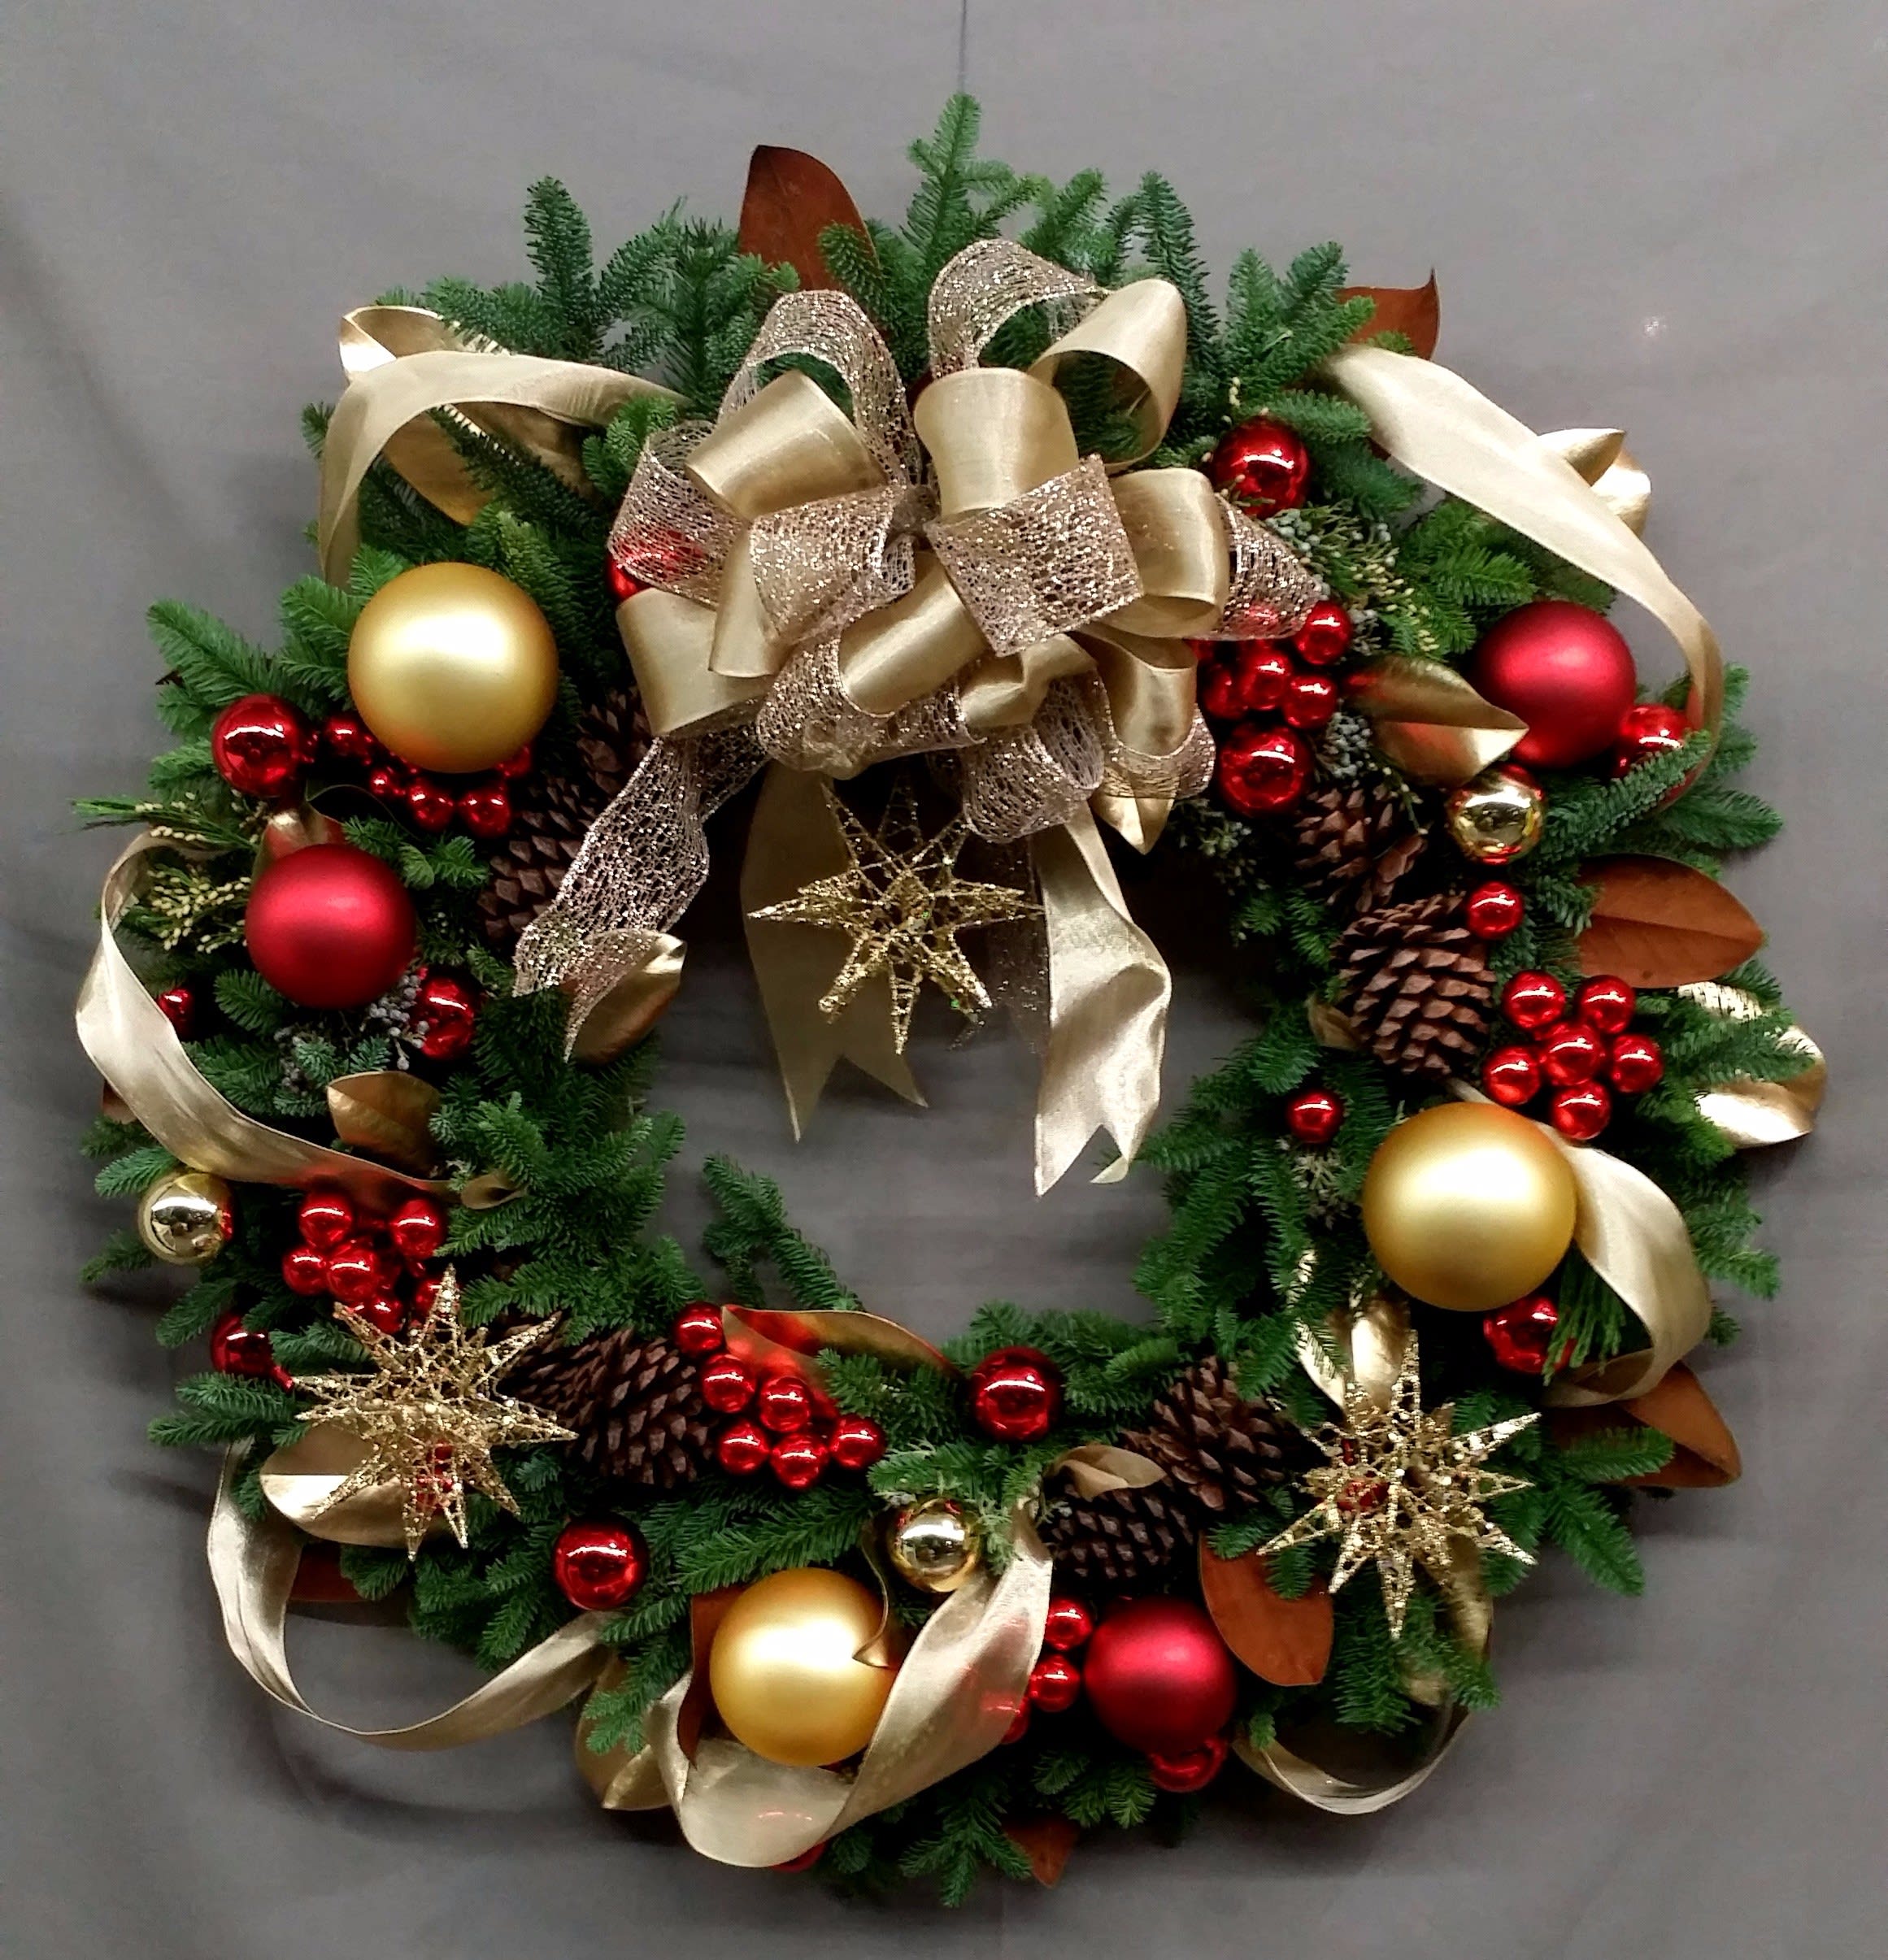 Large Holiday Wreath in Los Angeles, CA Floral Design by Dave's Flowers